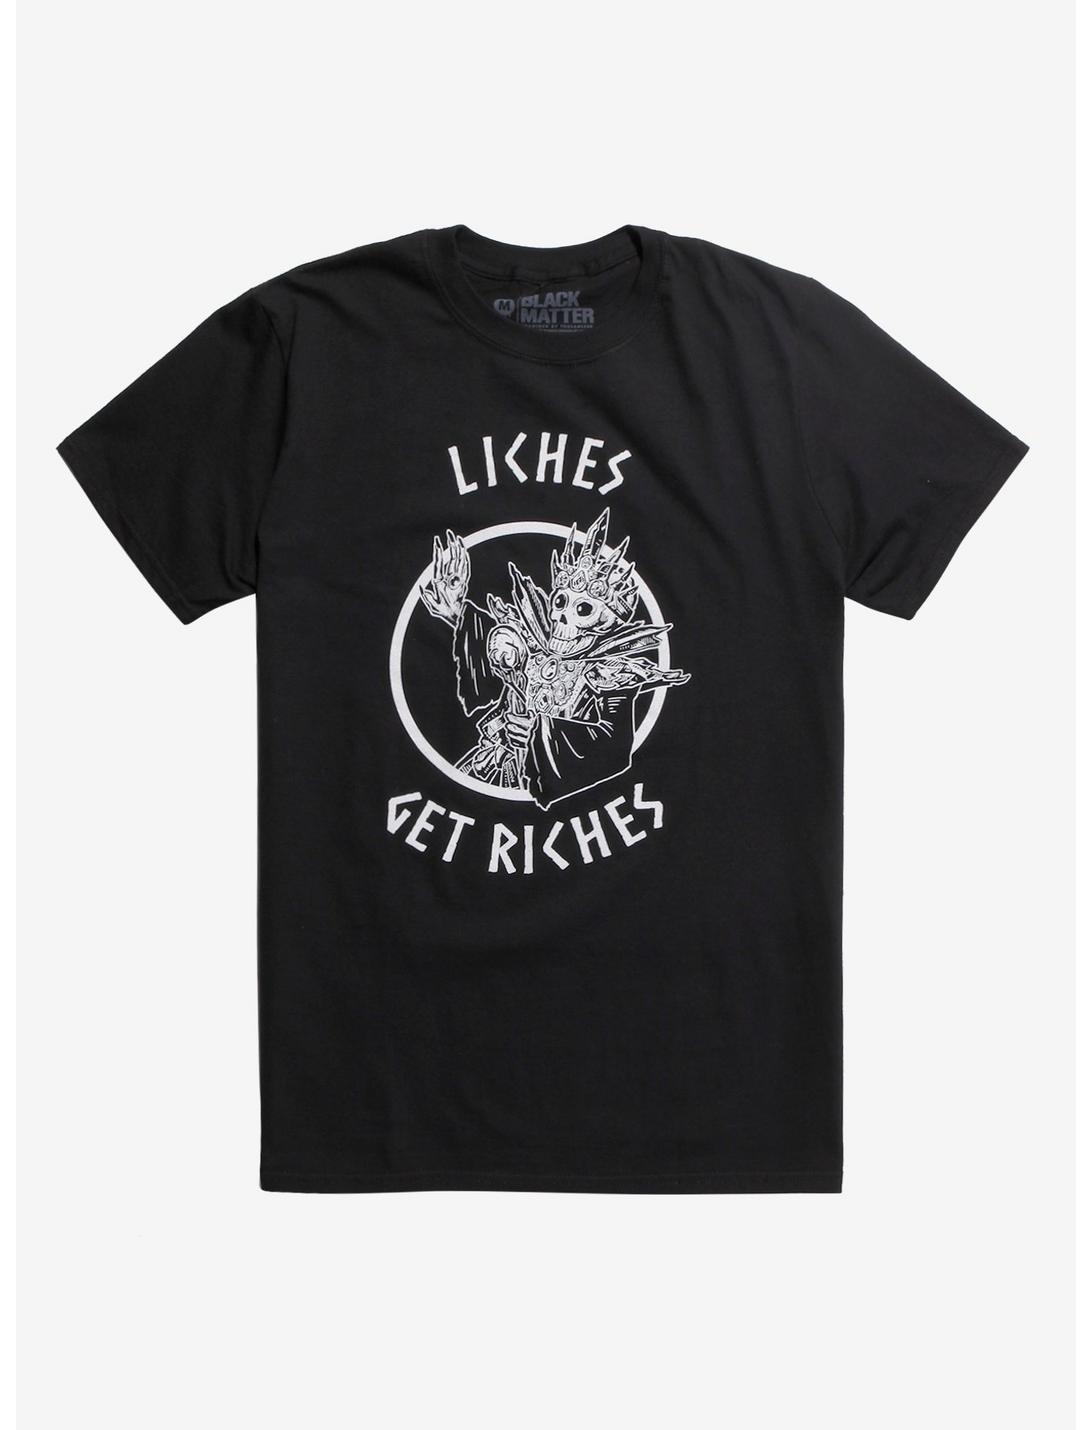 Liches Get Riches T-Shirt By Voidmerch Hot Topic Exclusive, WHITE, hi-res